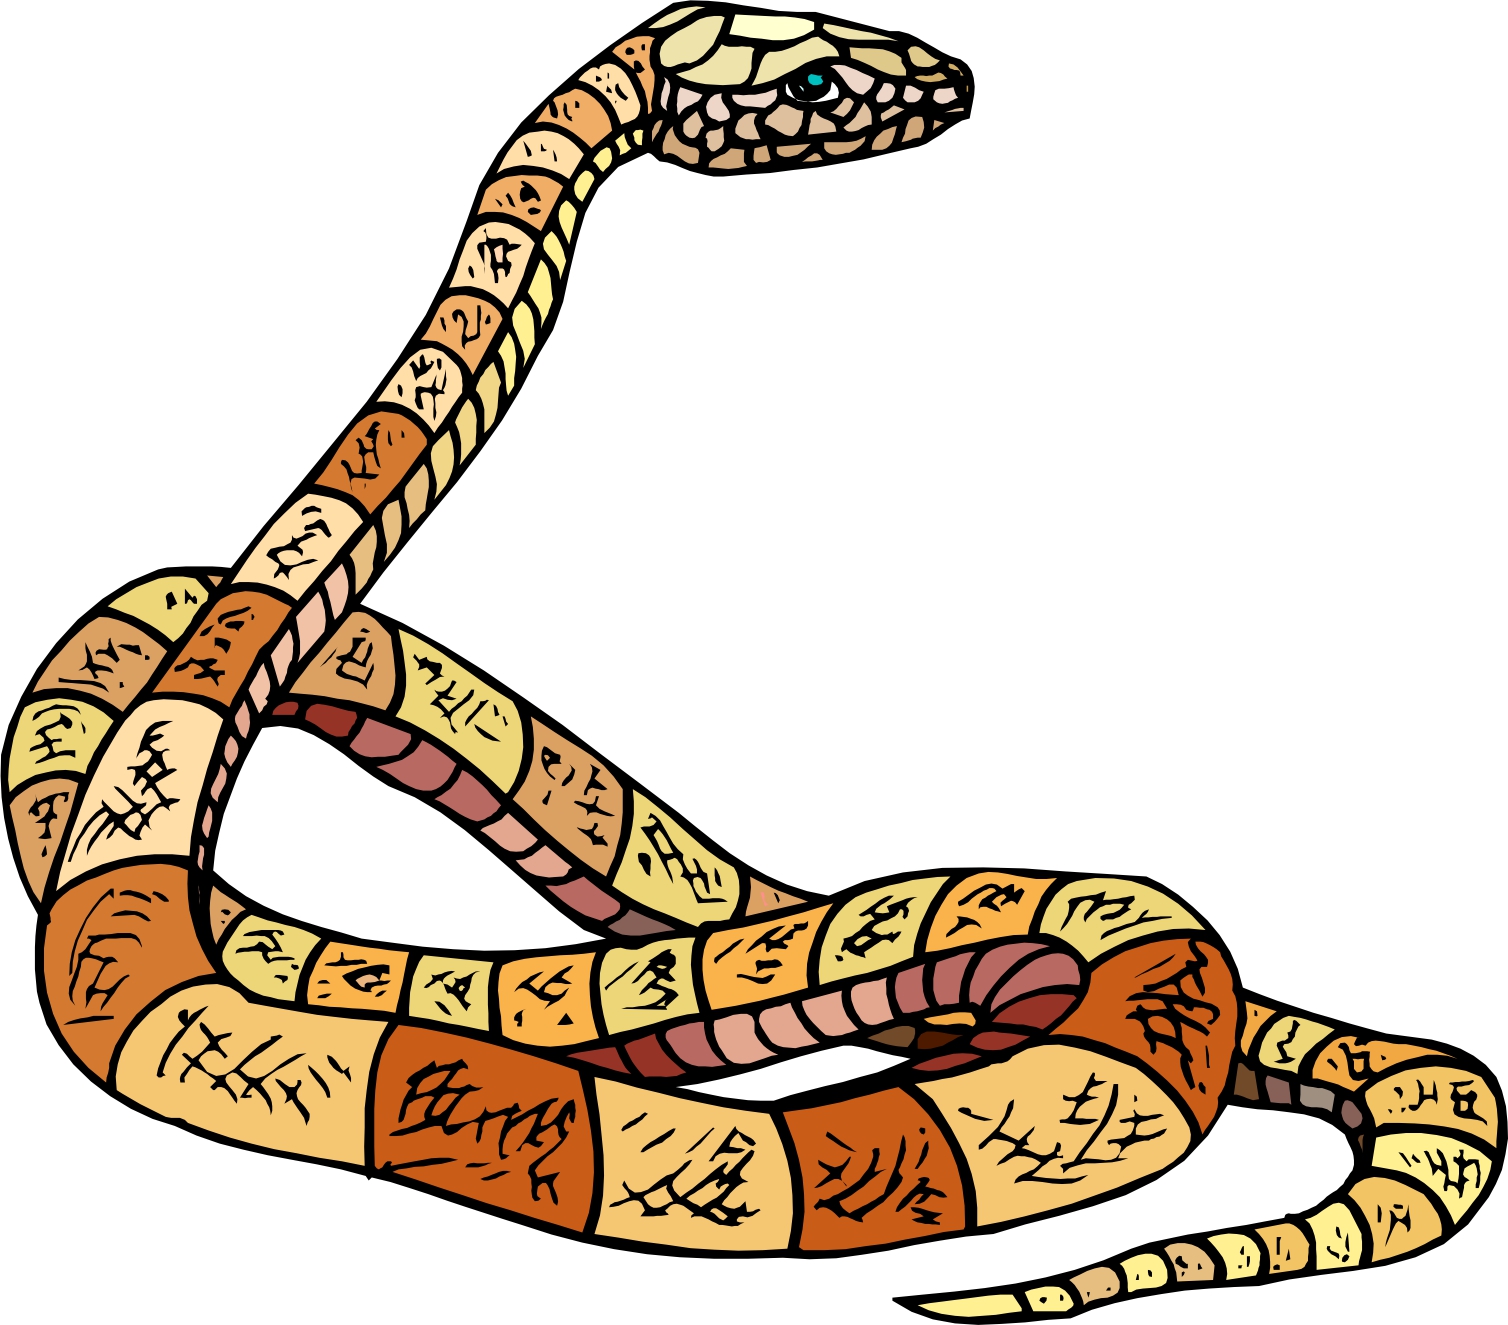 Picture Of A Cartoon Snake | Free Download Clip Art | Free Clip ...